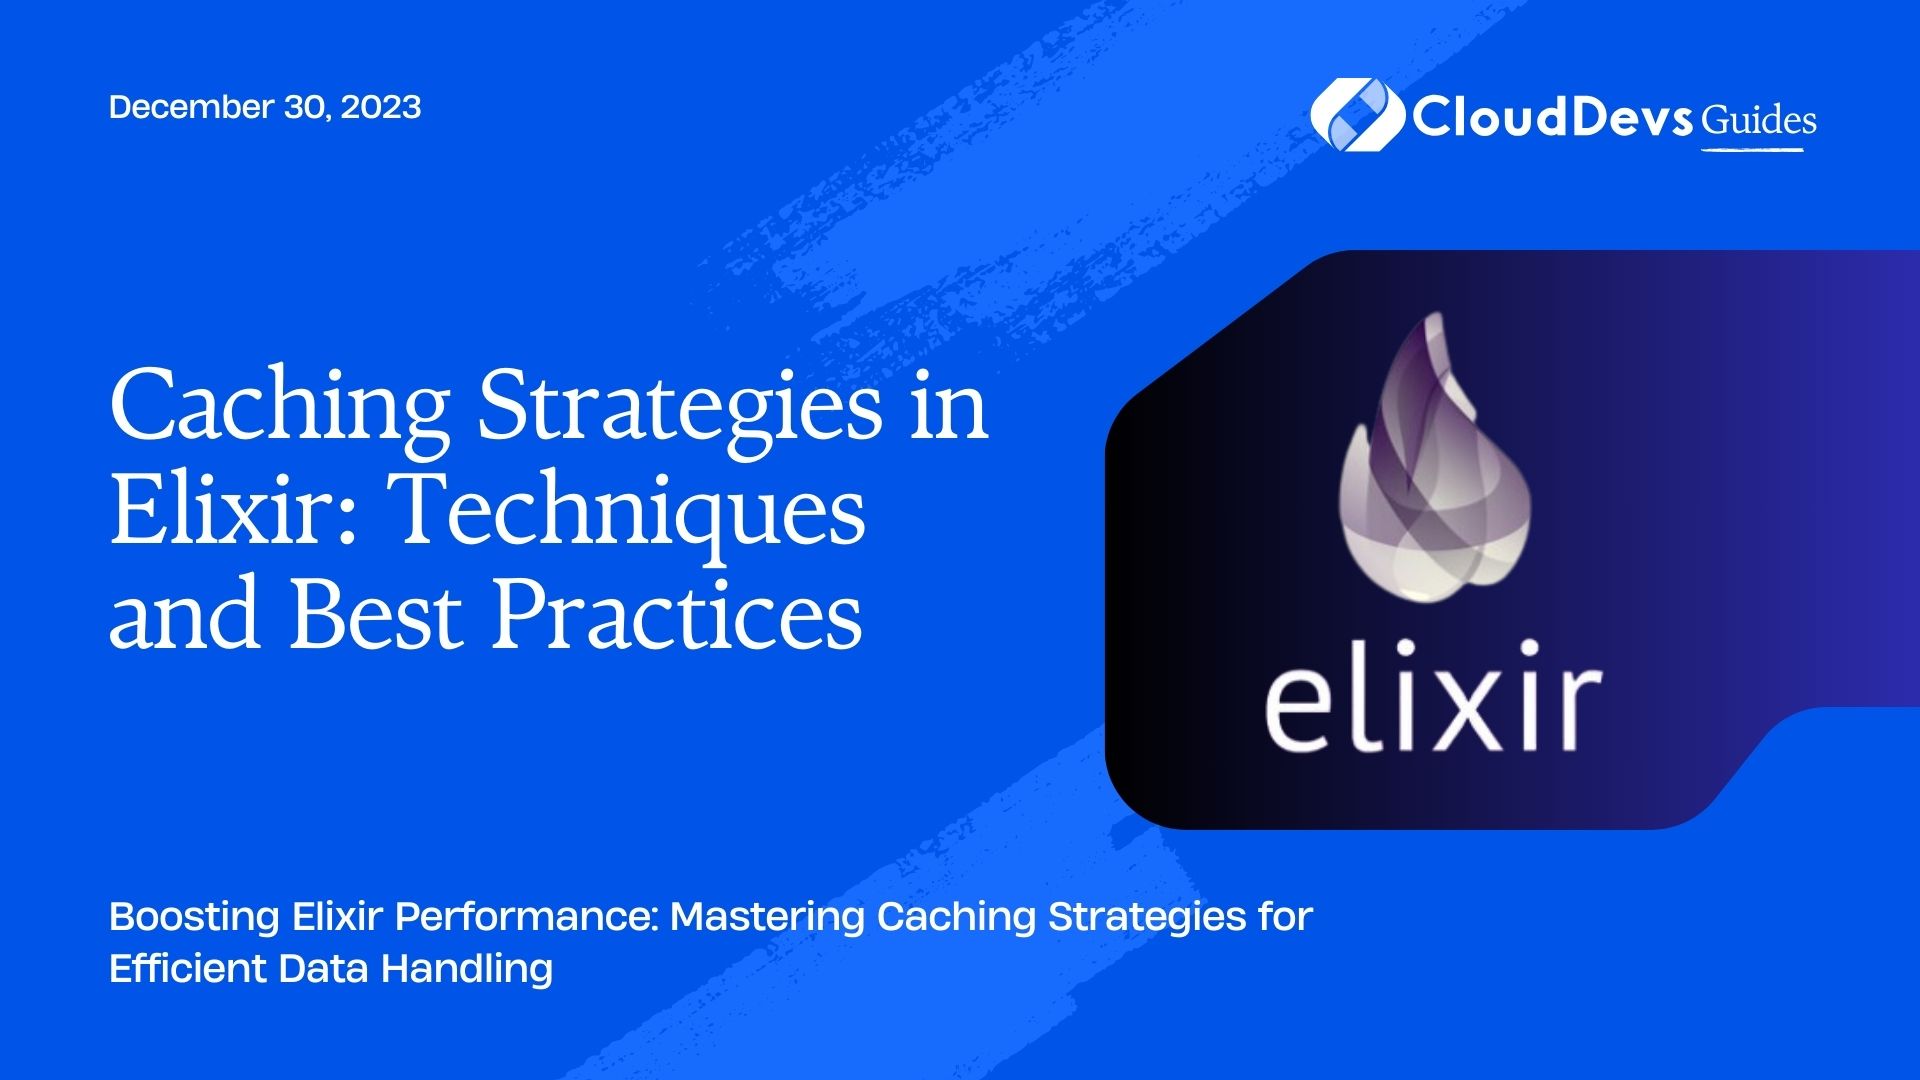 Caching Strategies in Elixir: Techniques and Best Practices